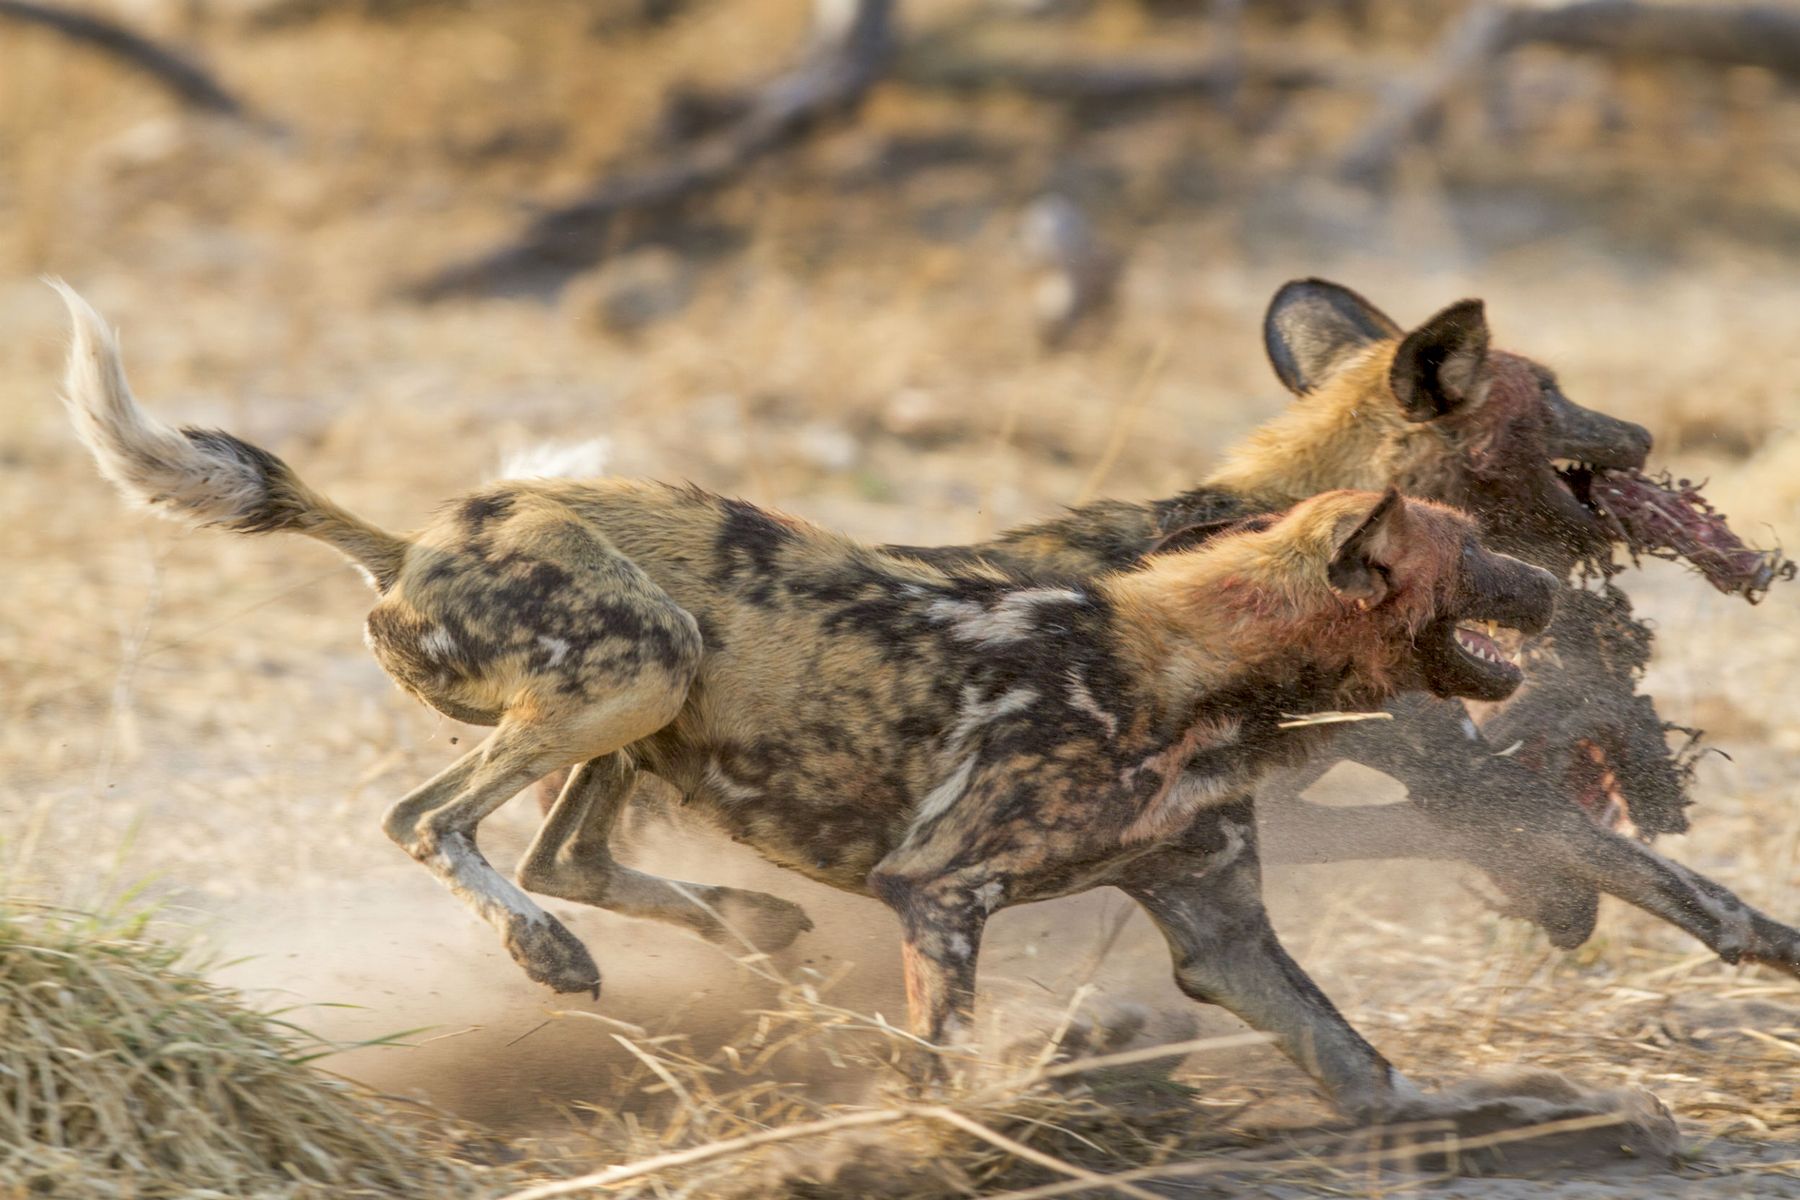 Wild Dogs are still thriving in Botswana because of its rich wildlife